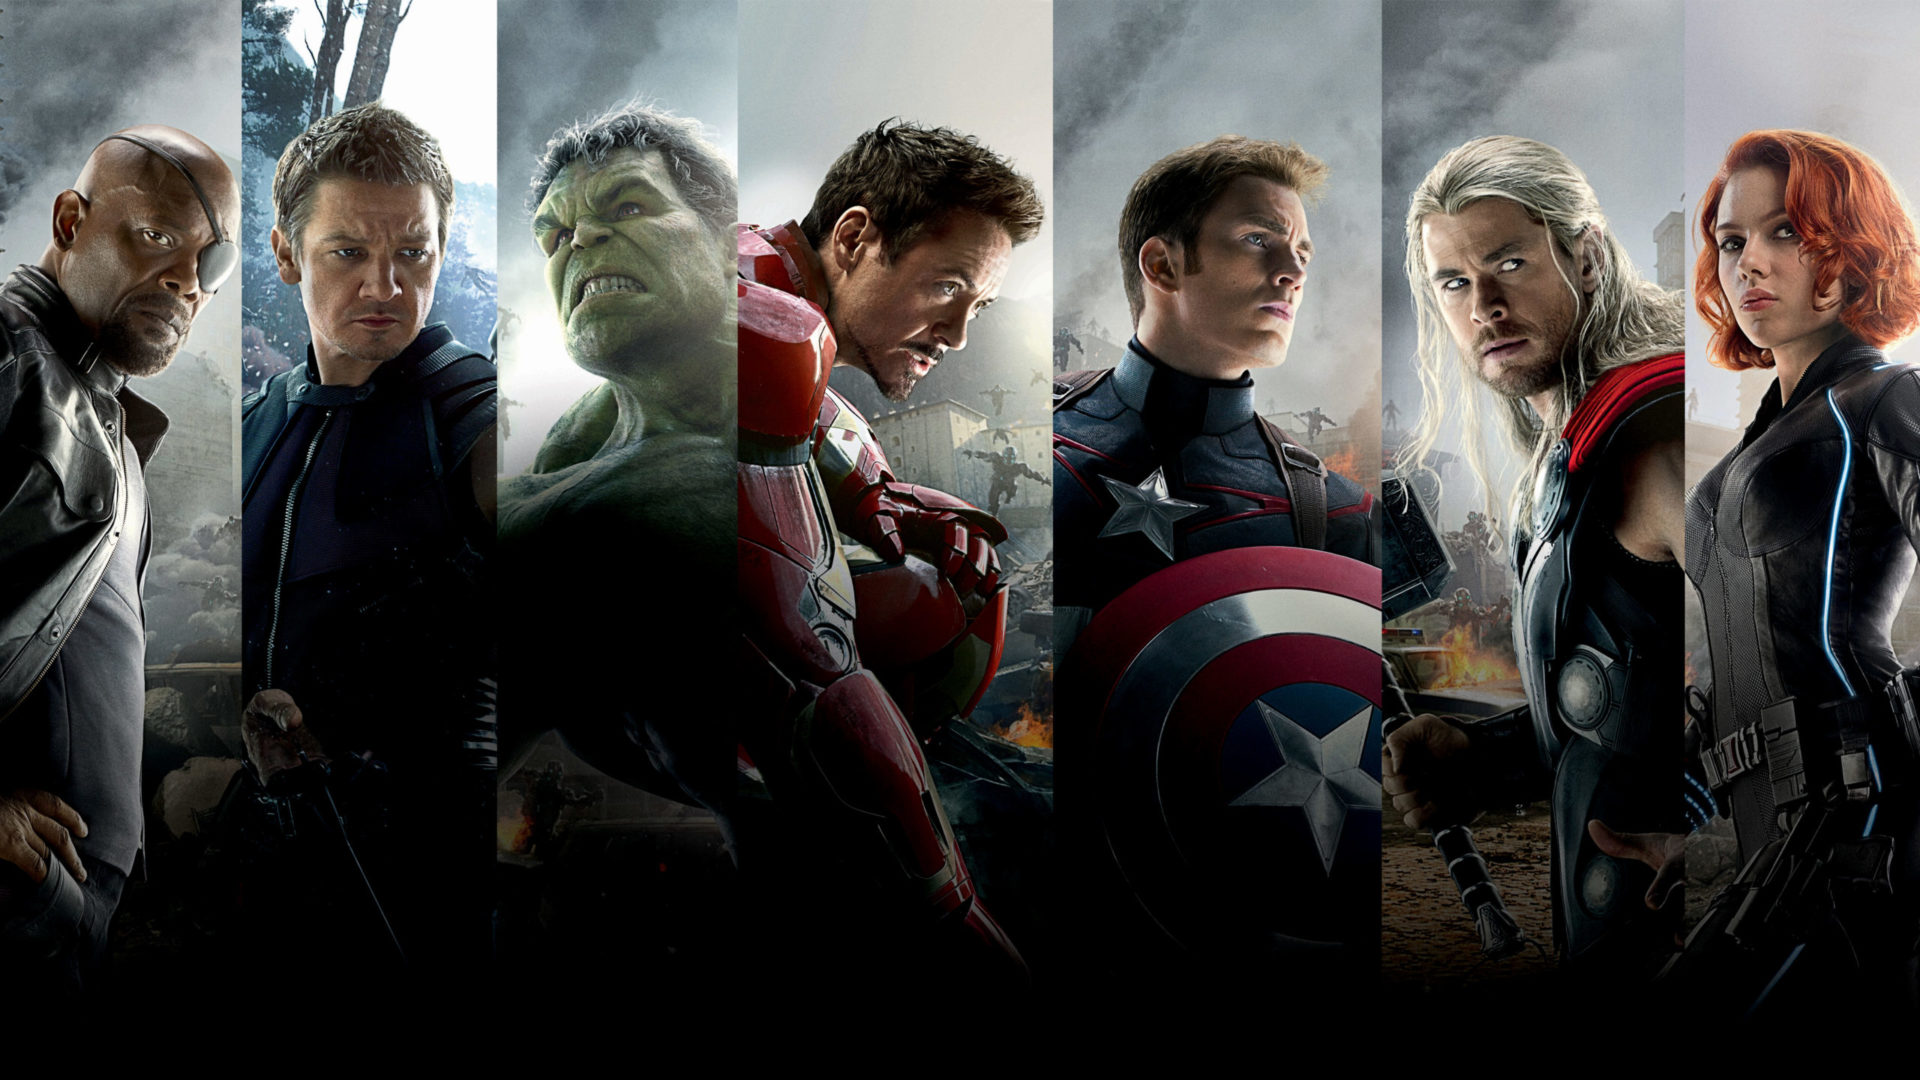 Portraits of each of the main characters from Avengers: Age of Ultron